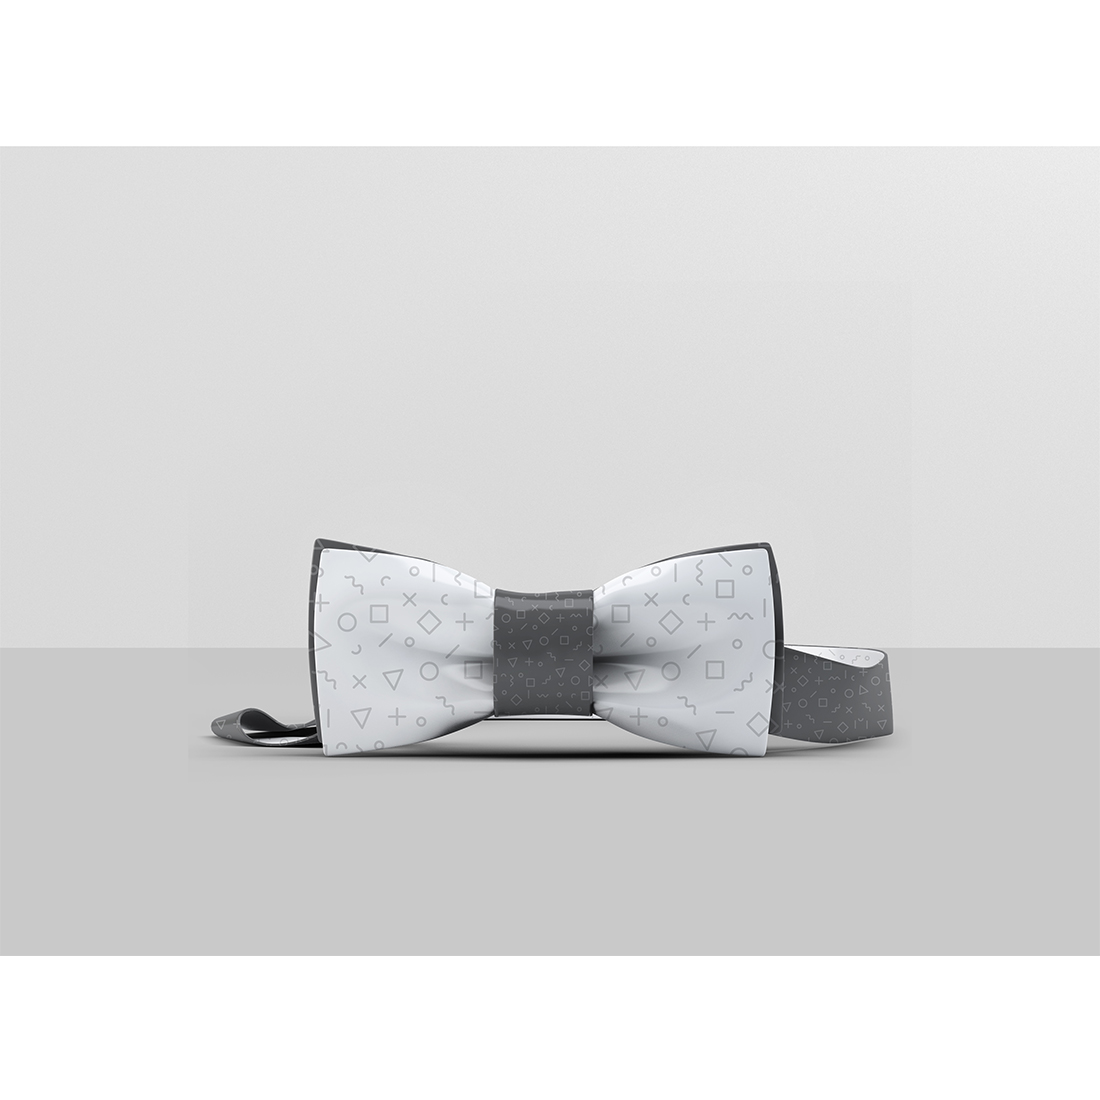 Realistic Bow Tie Mockup cover image.